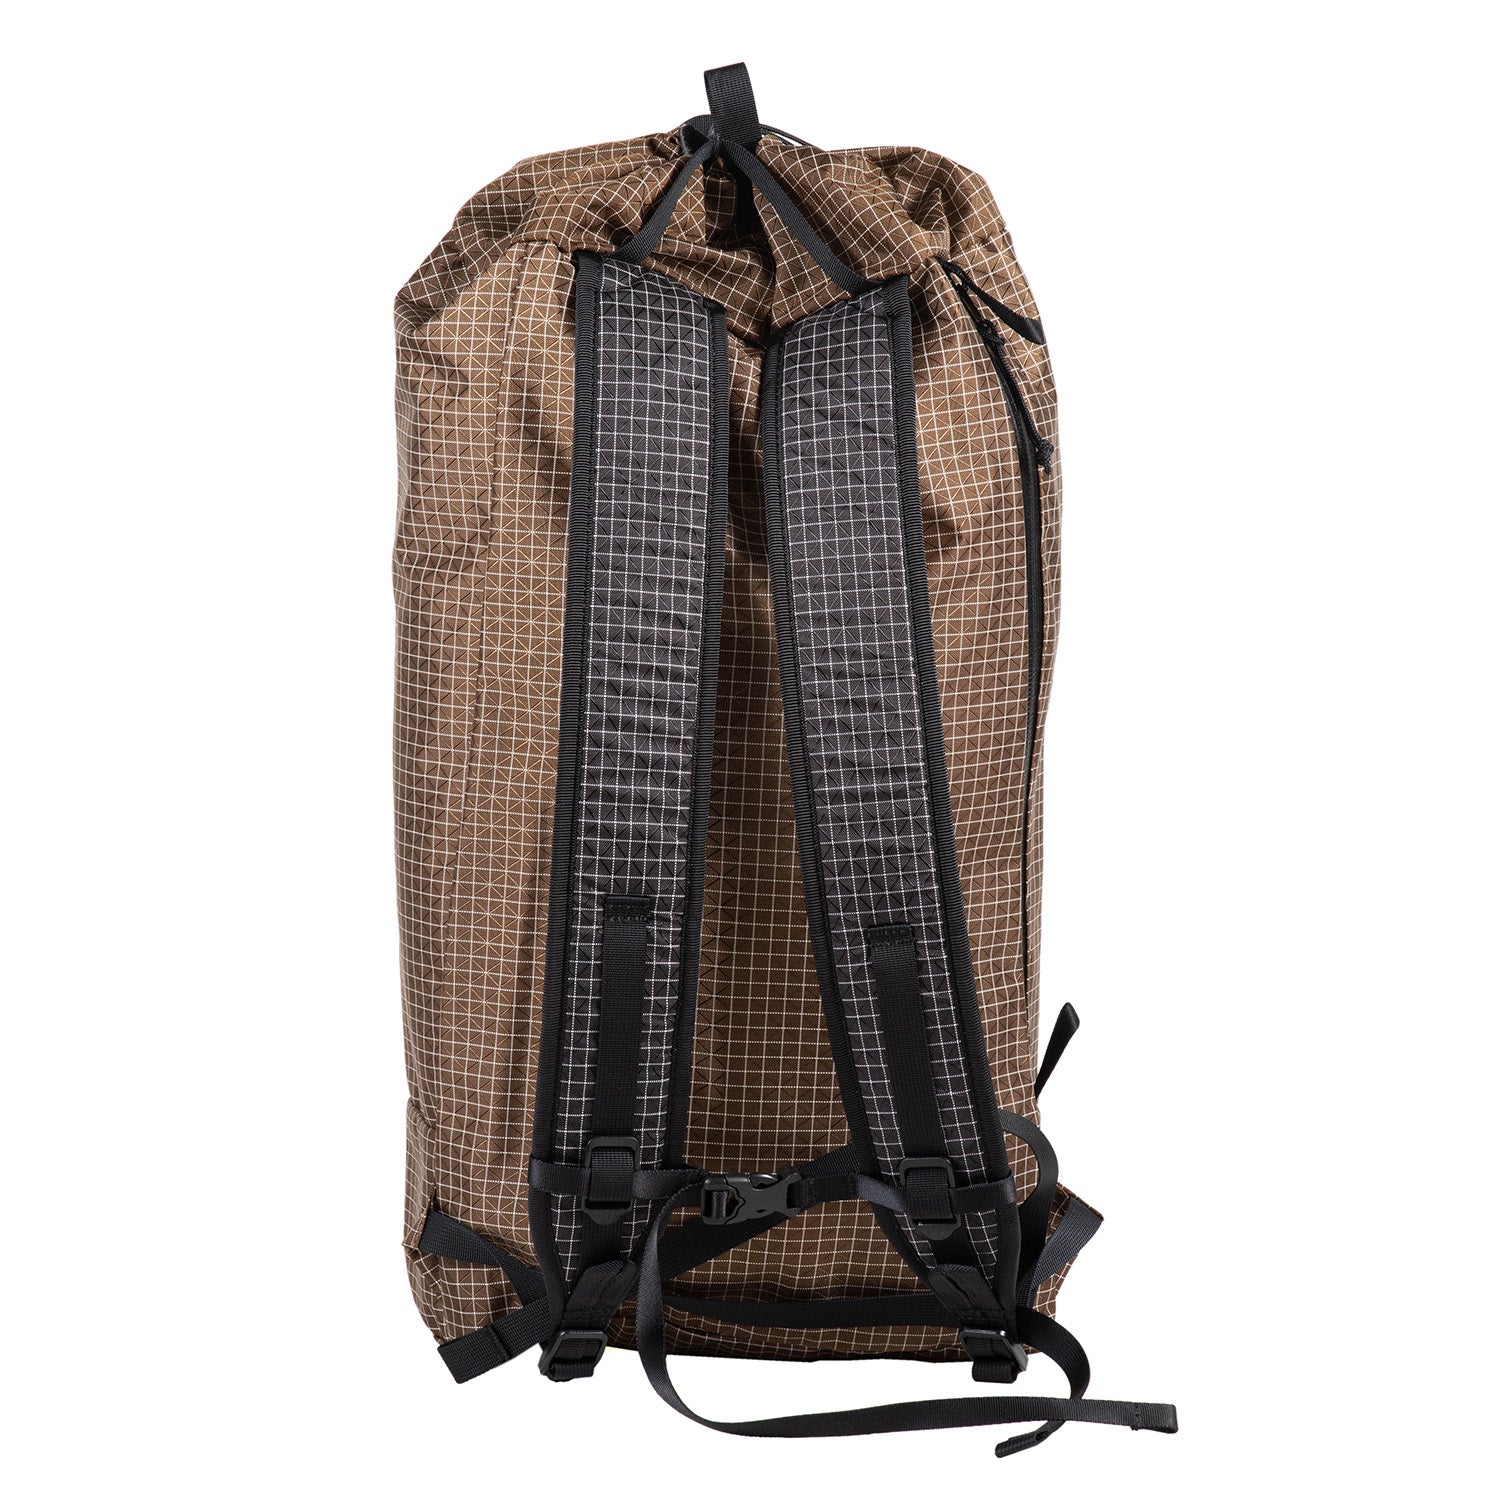 RAWLOW MOUNTAIN WORKS Cocoon Pack "SPECTRA"